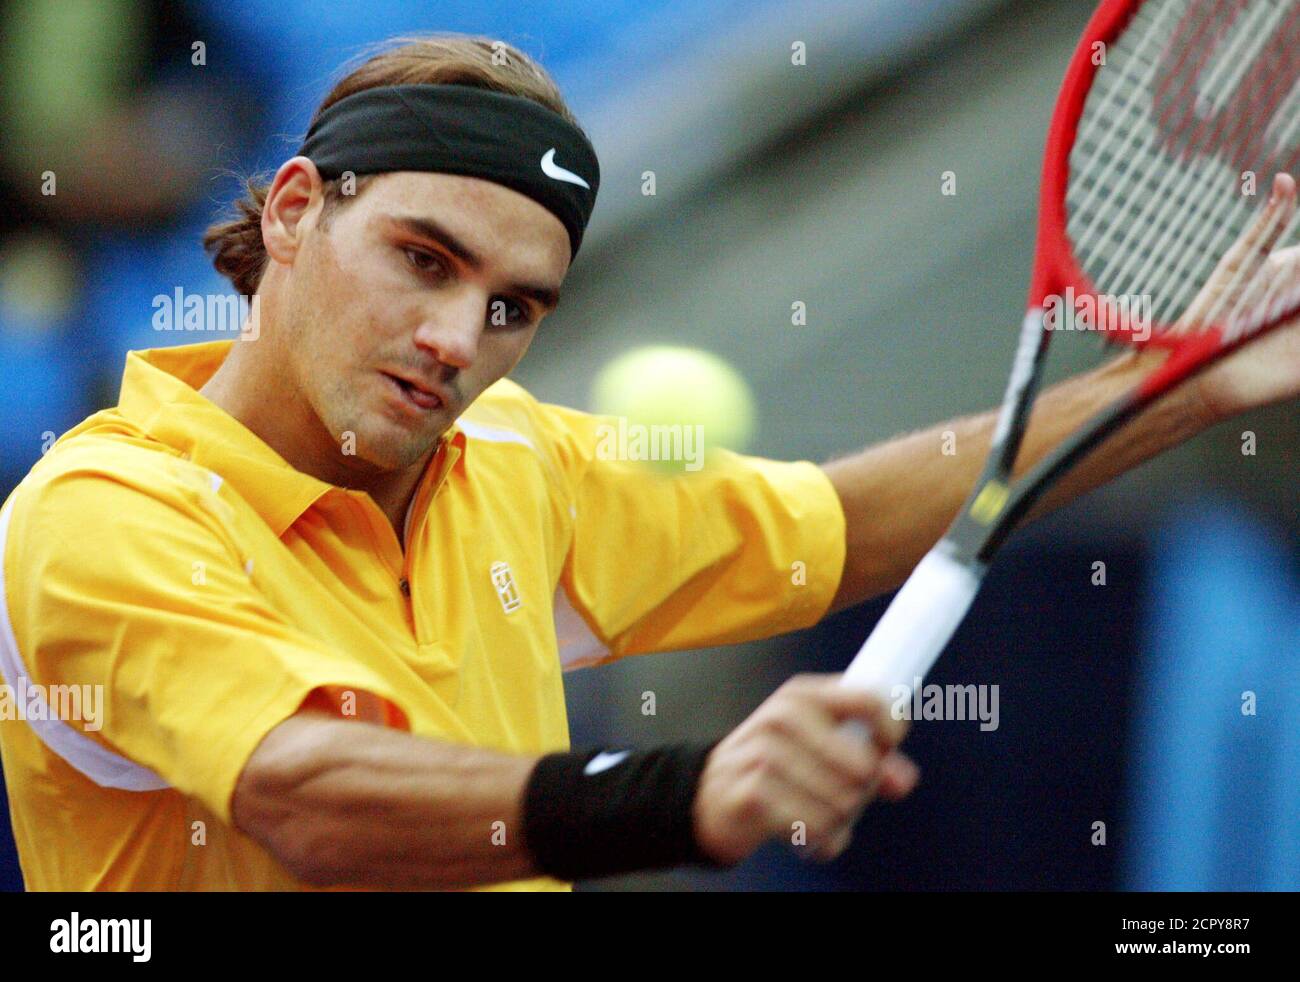 Roger Federer of Switzerland returns the ball to Russia's Denis Golovanov  during their Kremlin Cup tennis match in Moscow October 2, 2002. Federer  won the match 6-0 6-1. REUTERS/Grigory Dukor GD/CLH Stock